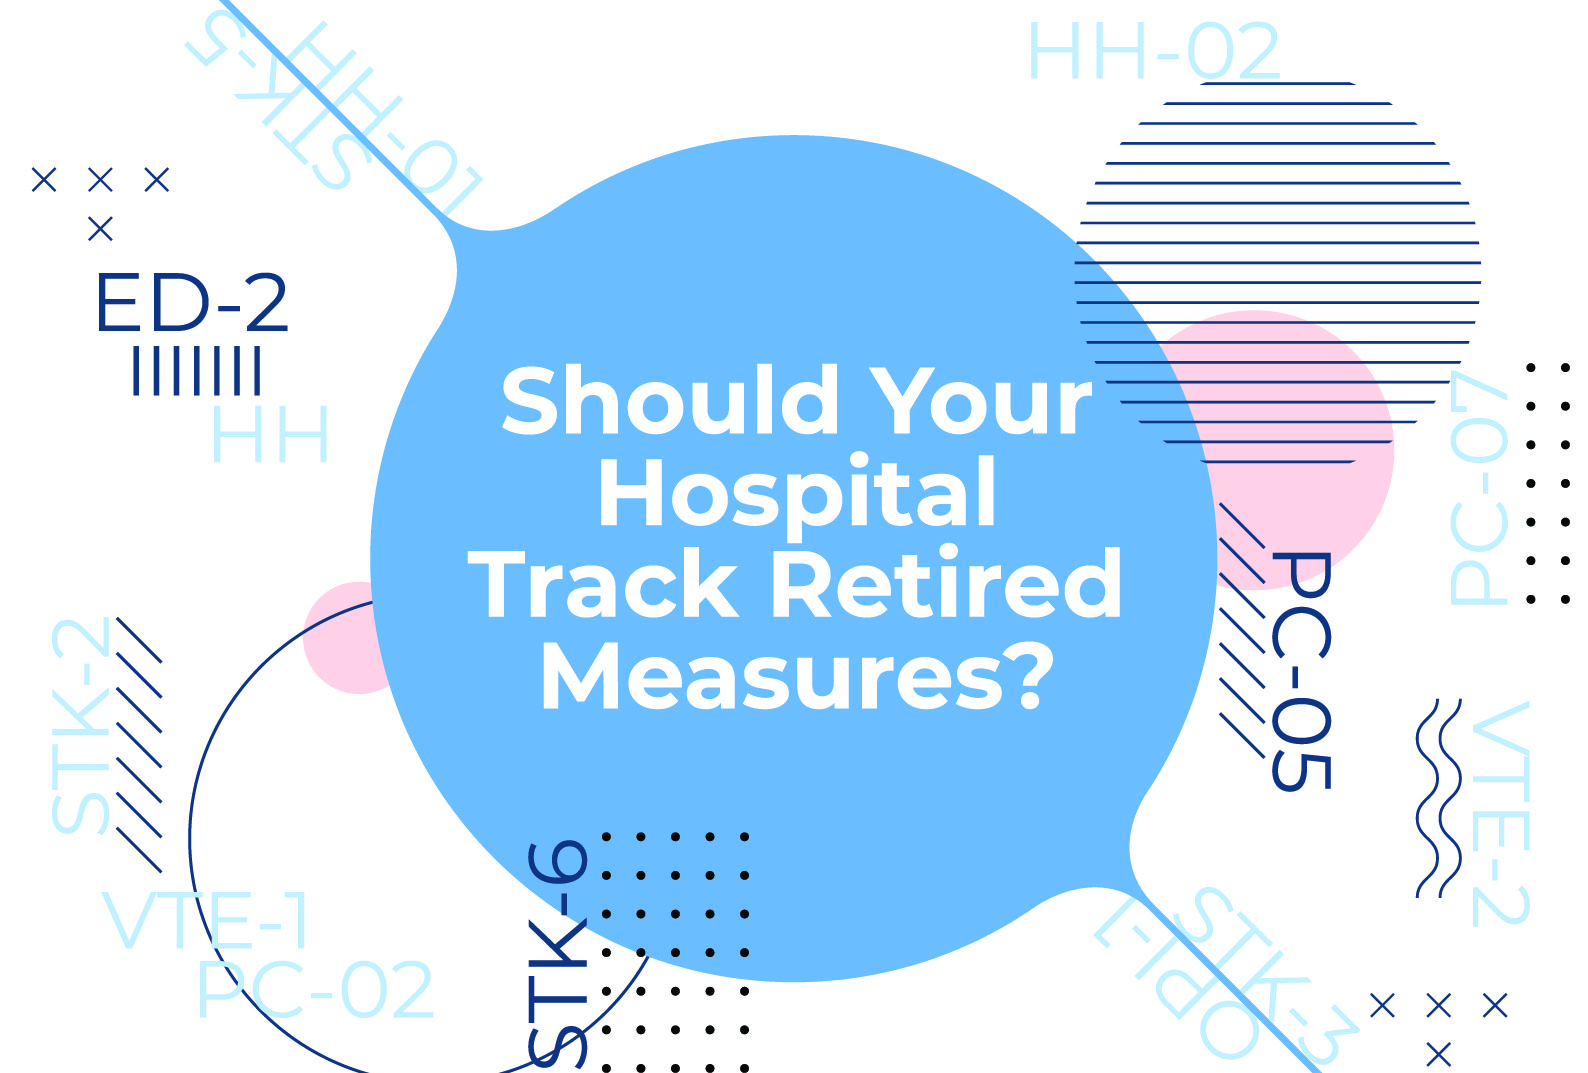 Should Your Hospital Track Retired Measures?